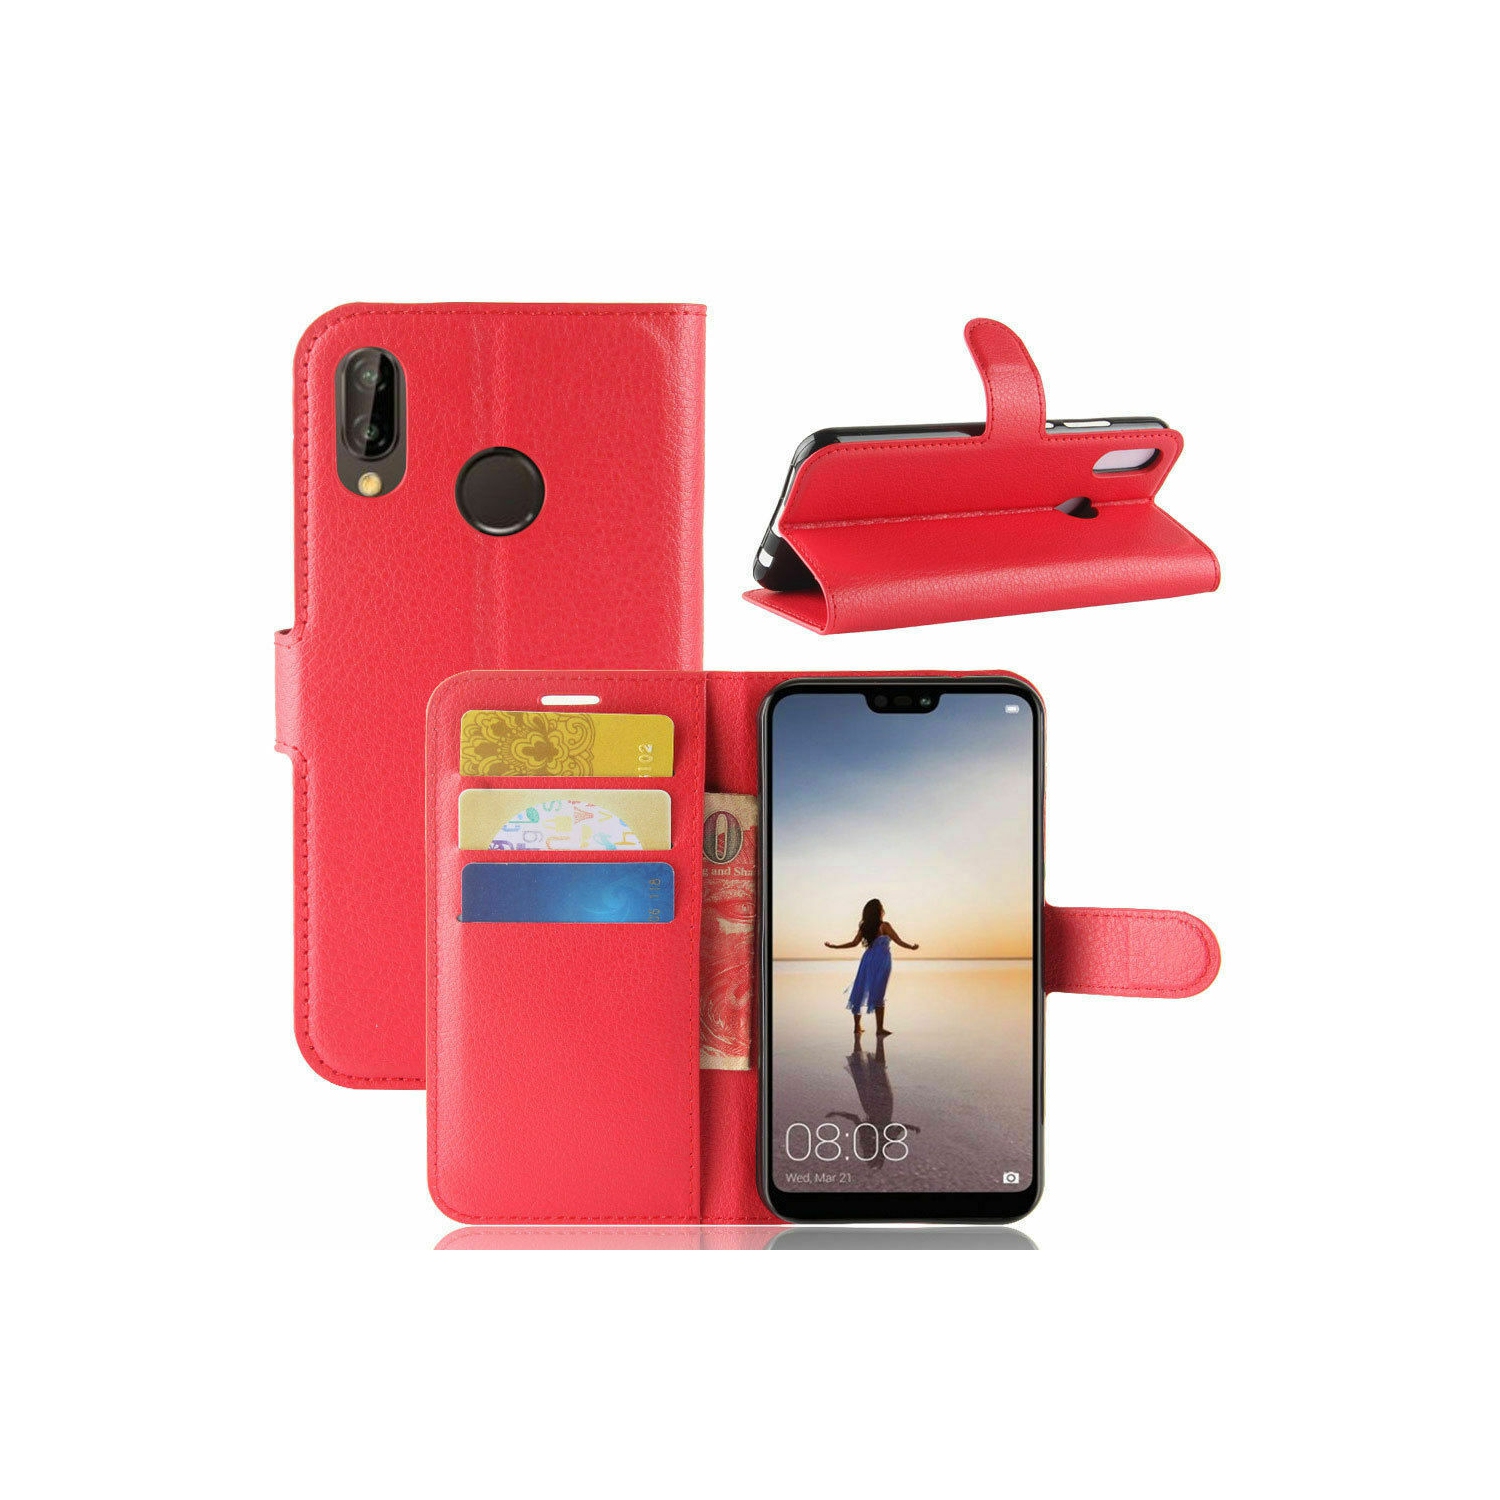 [CS] Huawei P20 Lite Case, Magnetic Leather Folio Wallet Flip Case Cover with Card Slot, Red